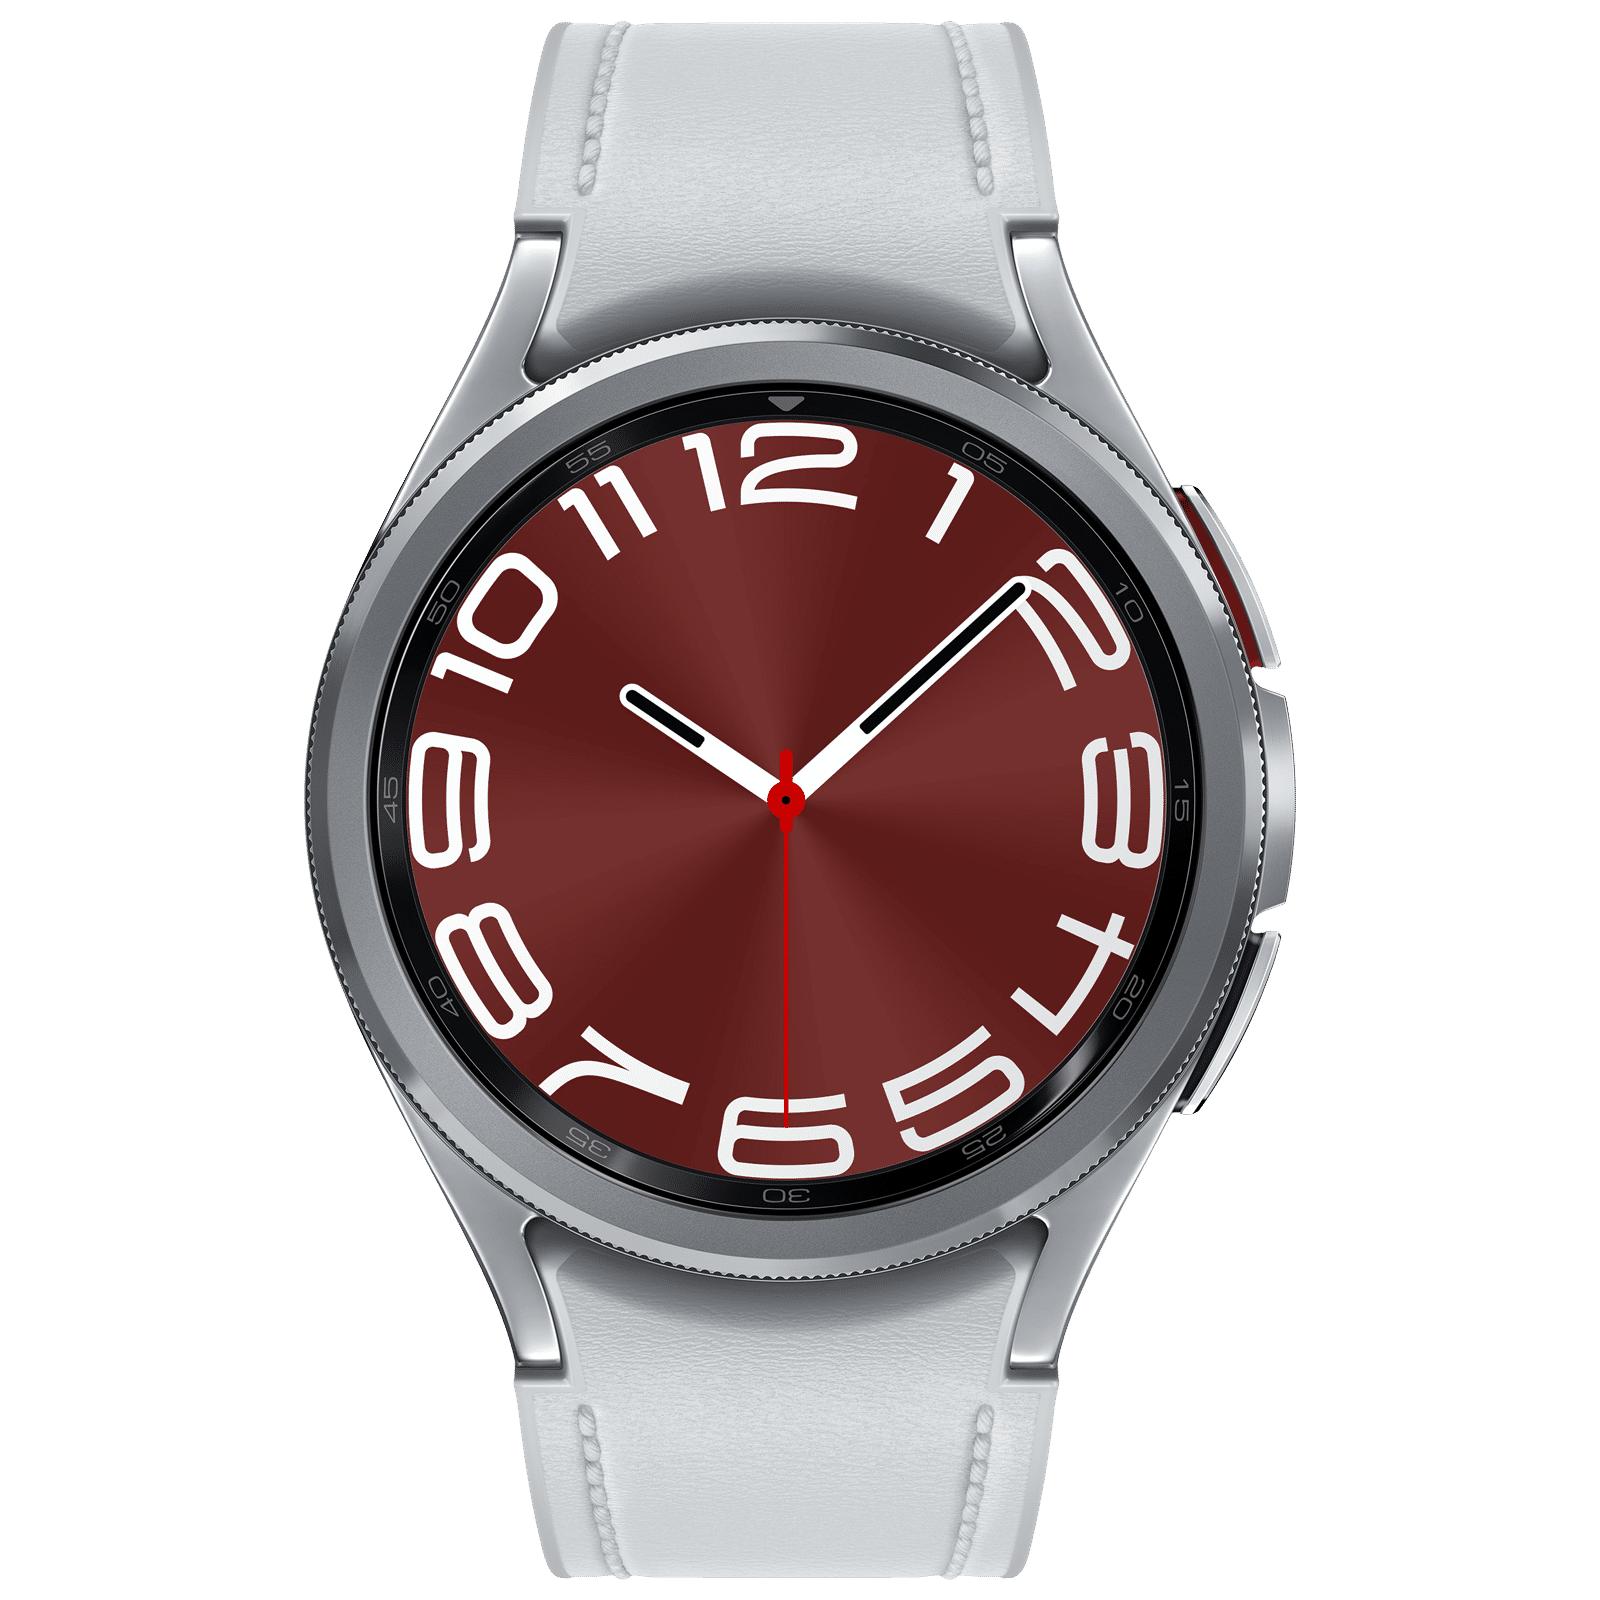 The Victory Watch - First Batch - 17j (43mm) – Vortic